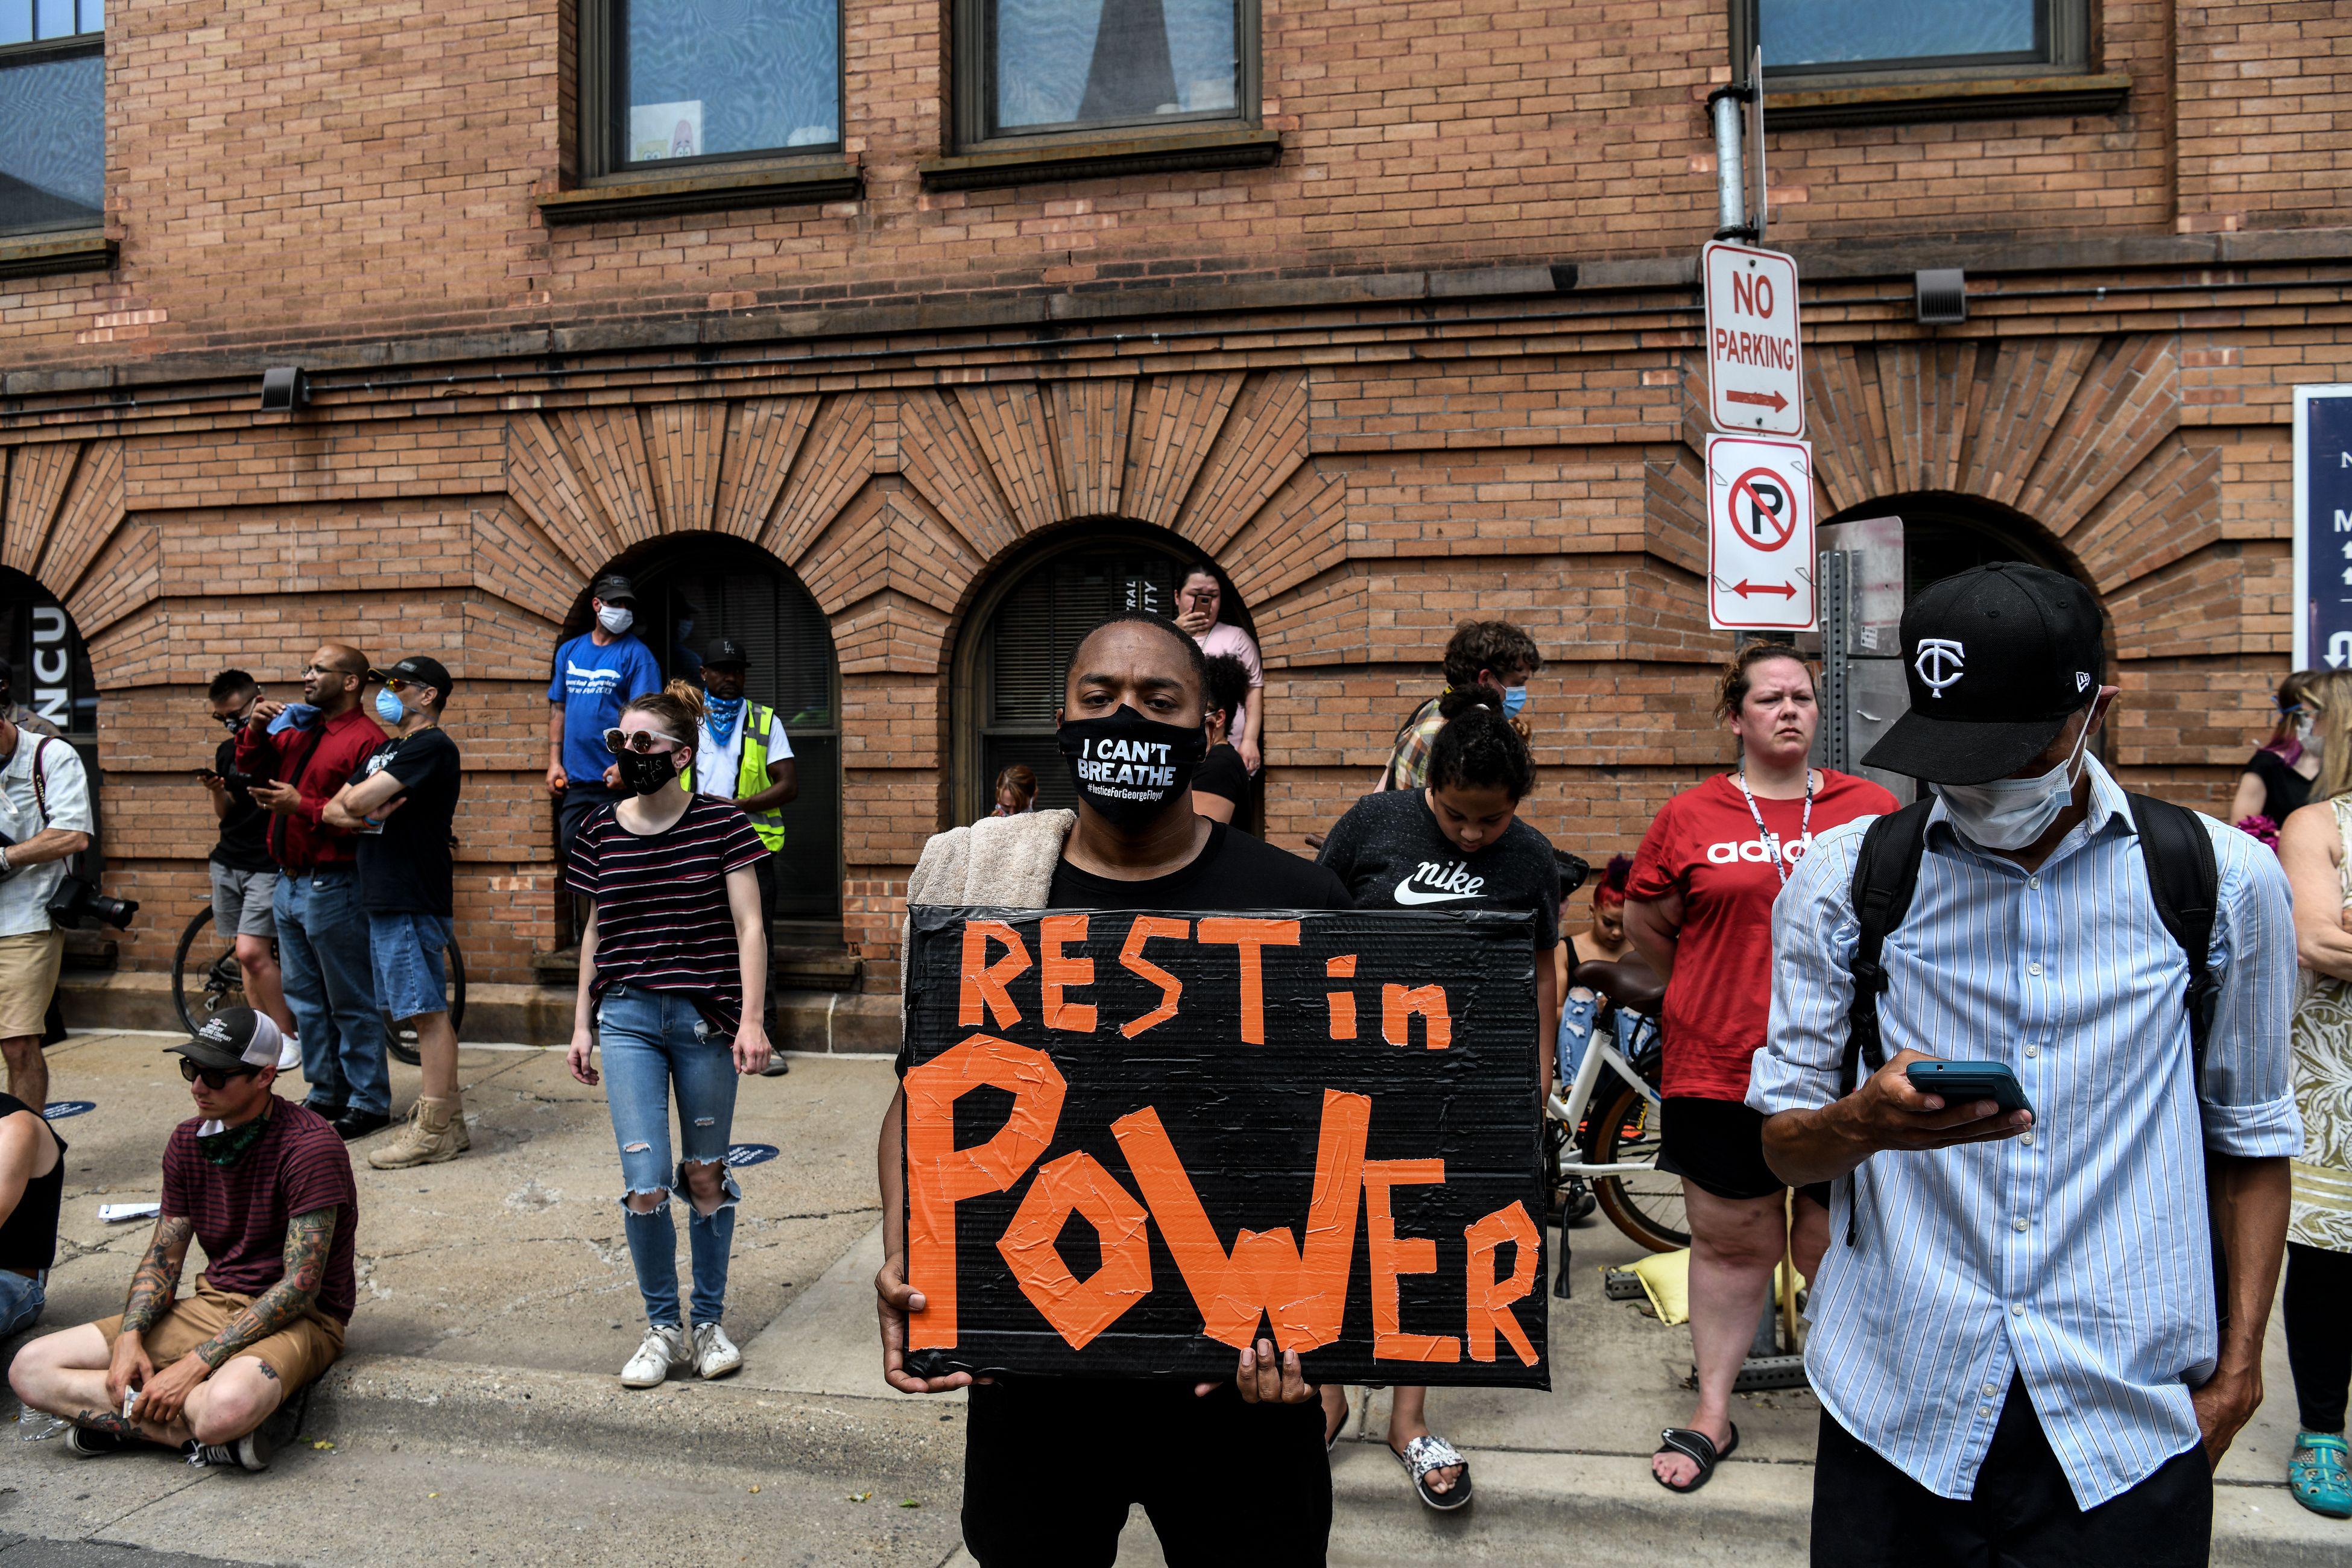 People gather outside of the memorial service in honor of George Floyd on June 4, 2020, in Minneapolis, Minnesota. - On May 25, 2020, Floyd, a 46-year-old black man suspected of passing a counterfeit $20 bill, died in Minneapolis after Derek Chauvin, a white police officer, pressed his knee to Floyd's neck for almost nine minutes. (Photo by CHANDAN KHANNA / AFP) (Photo by CHANDAN KHANNA/AFP via Getty Images)